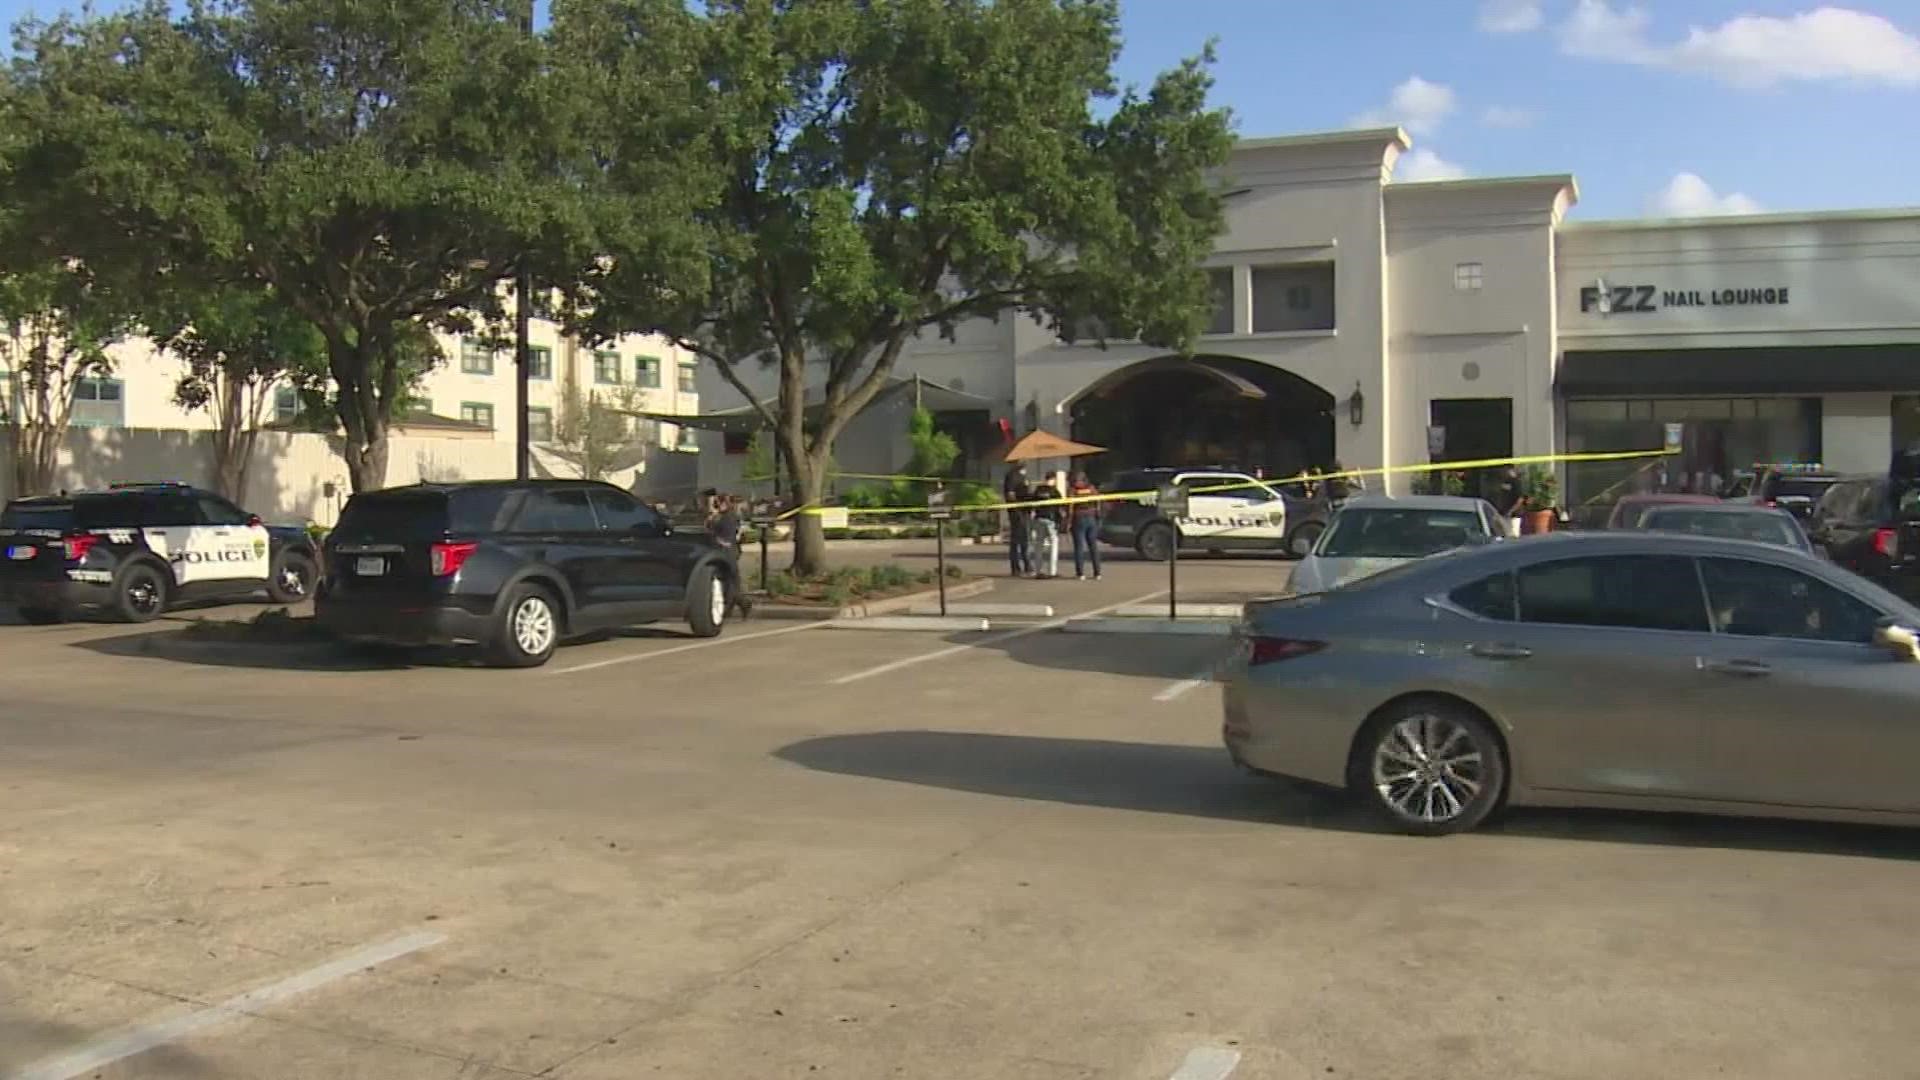 An off-duty police officer visiting from New Orleans was shot and killed Saturday on a restaurant patio in the Galleria area, according to HPD.